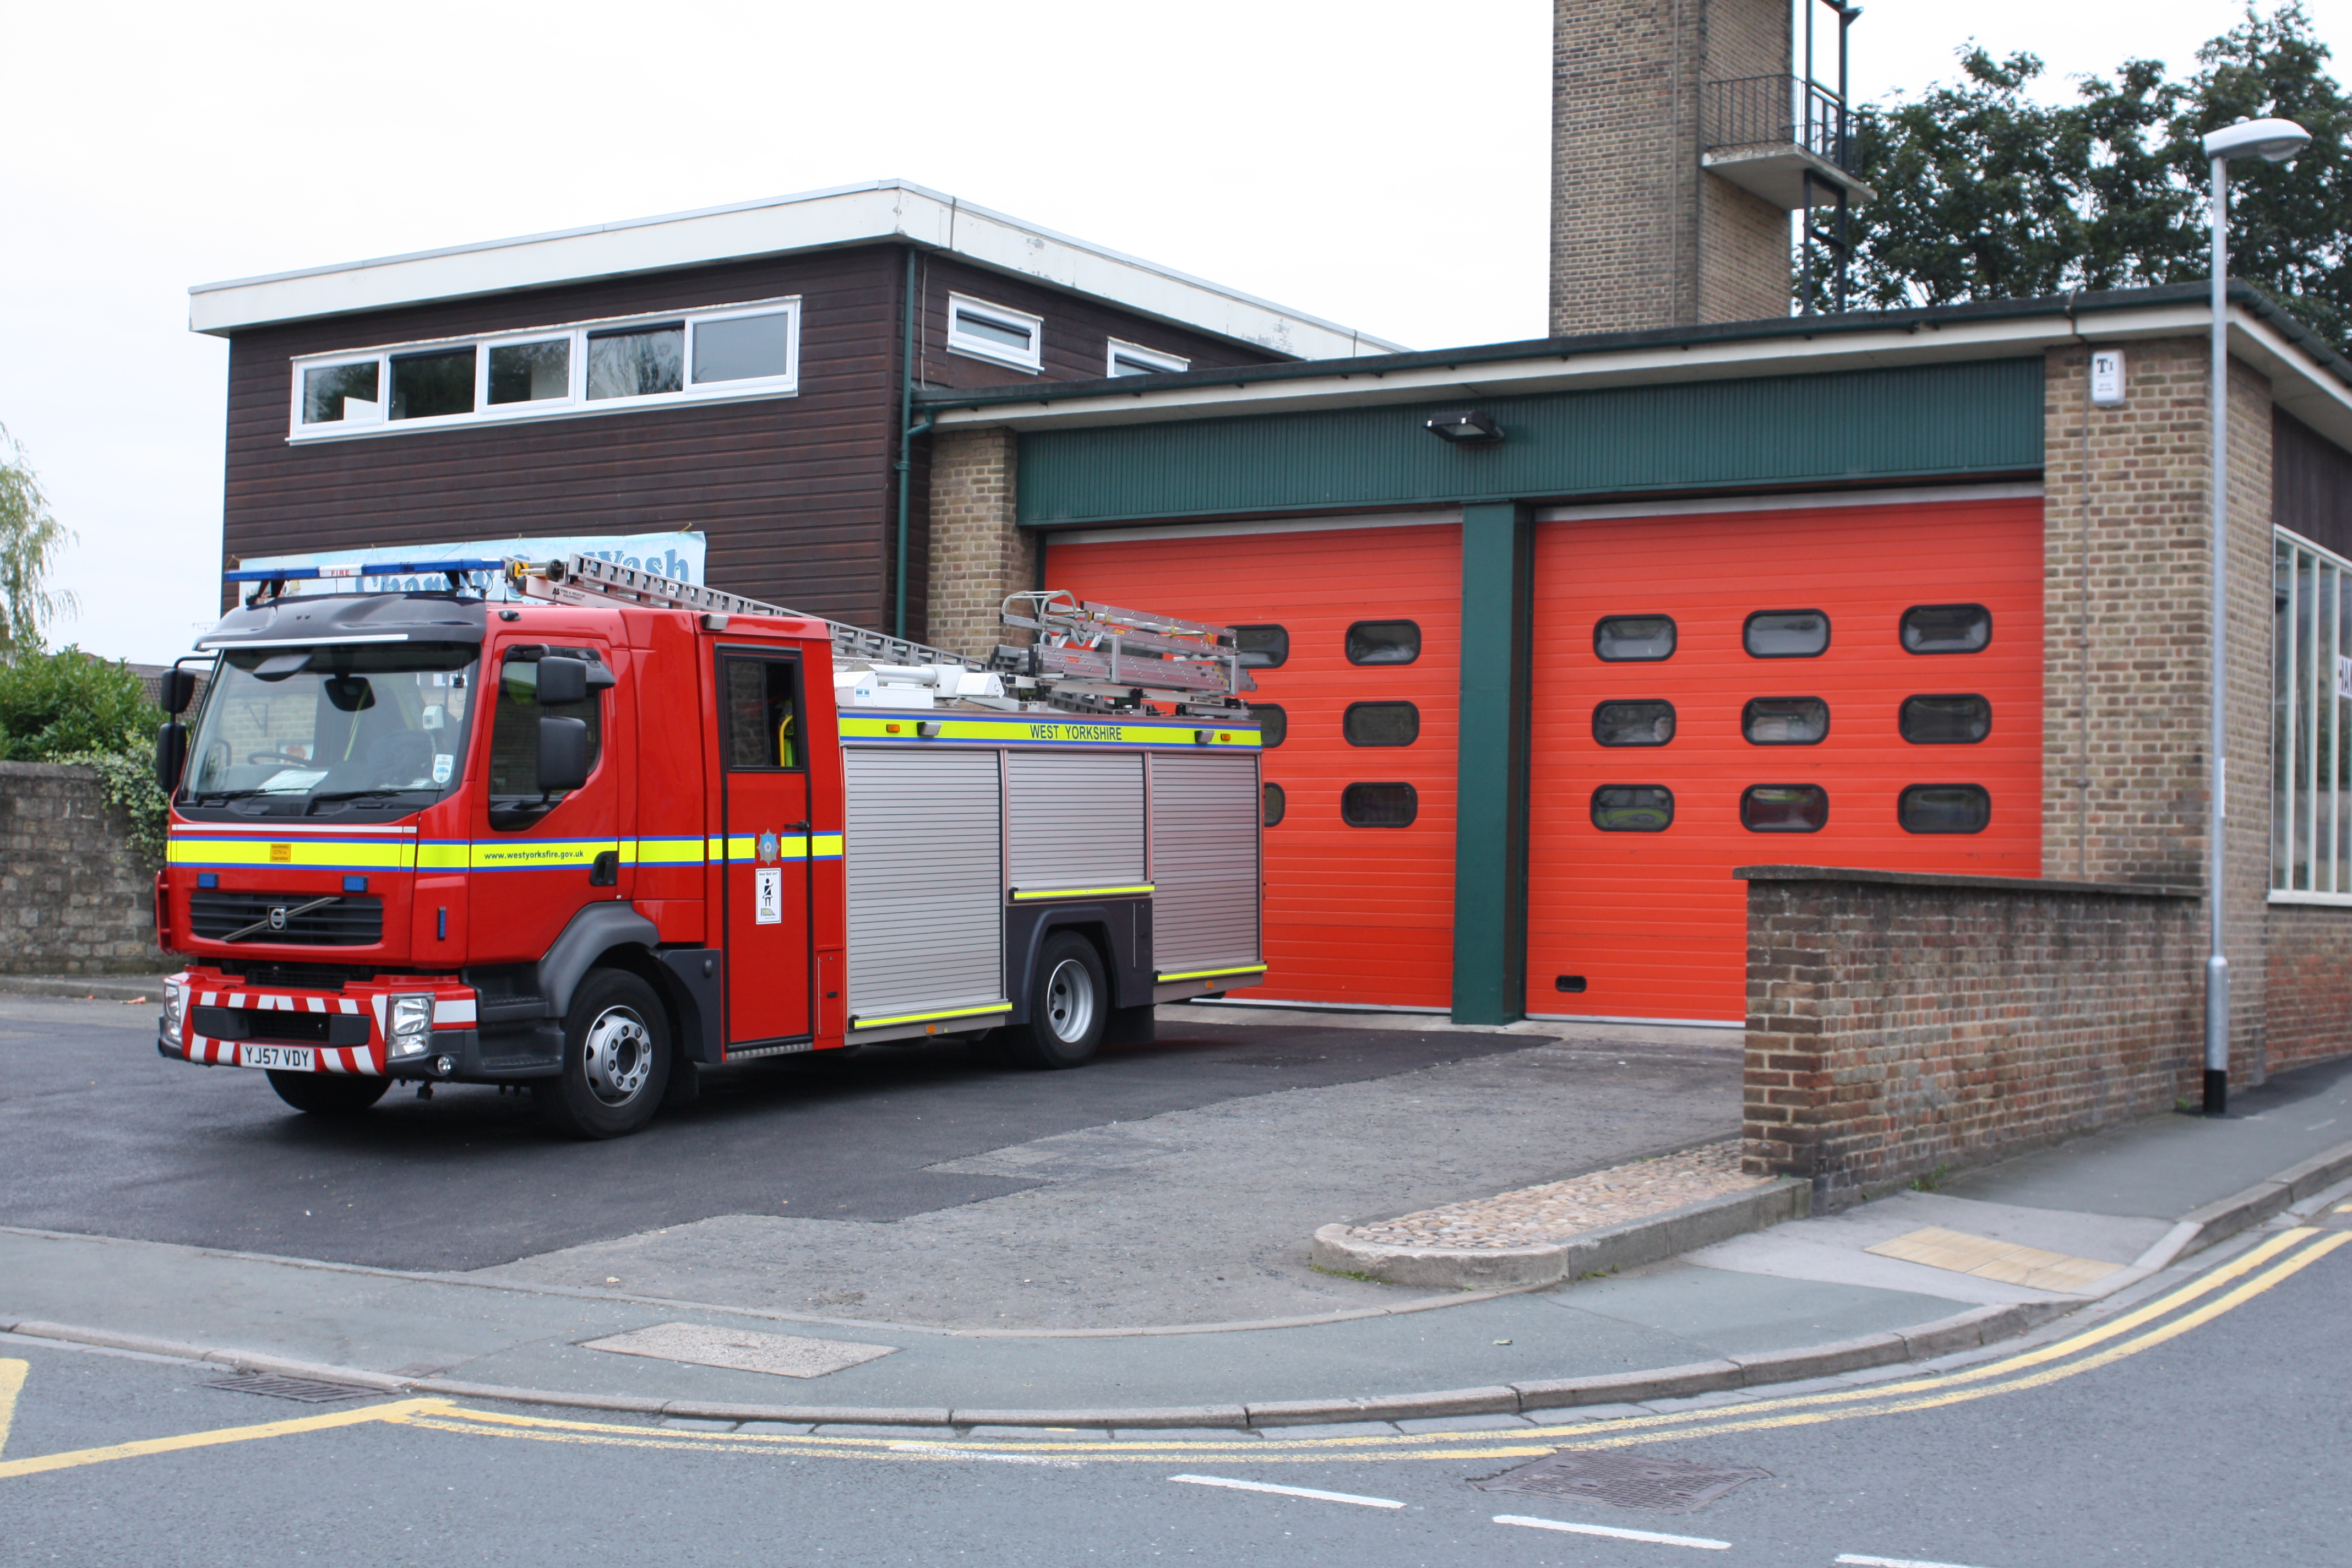 File:Wetherby fire station 001.jpg - Wikimedia Commons